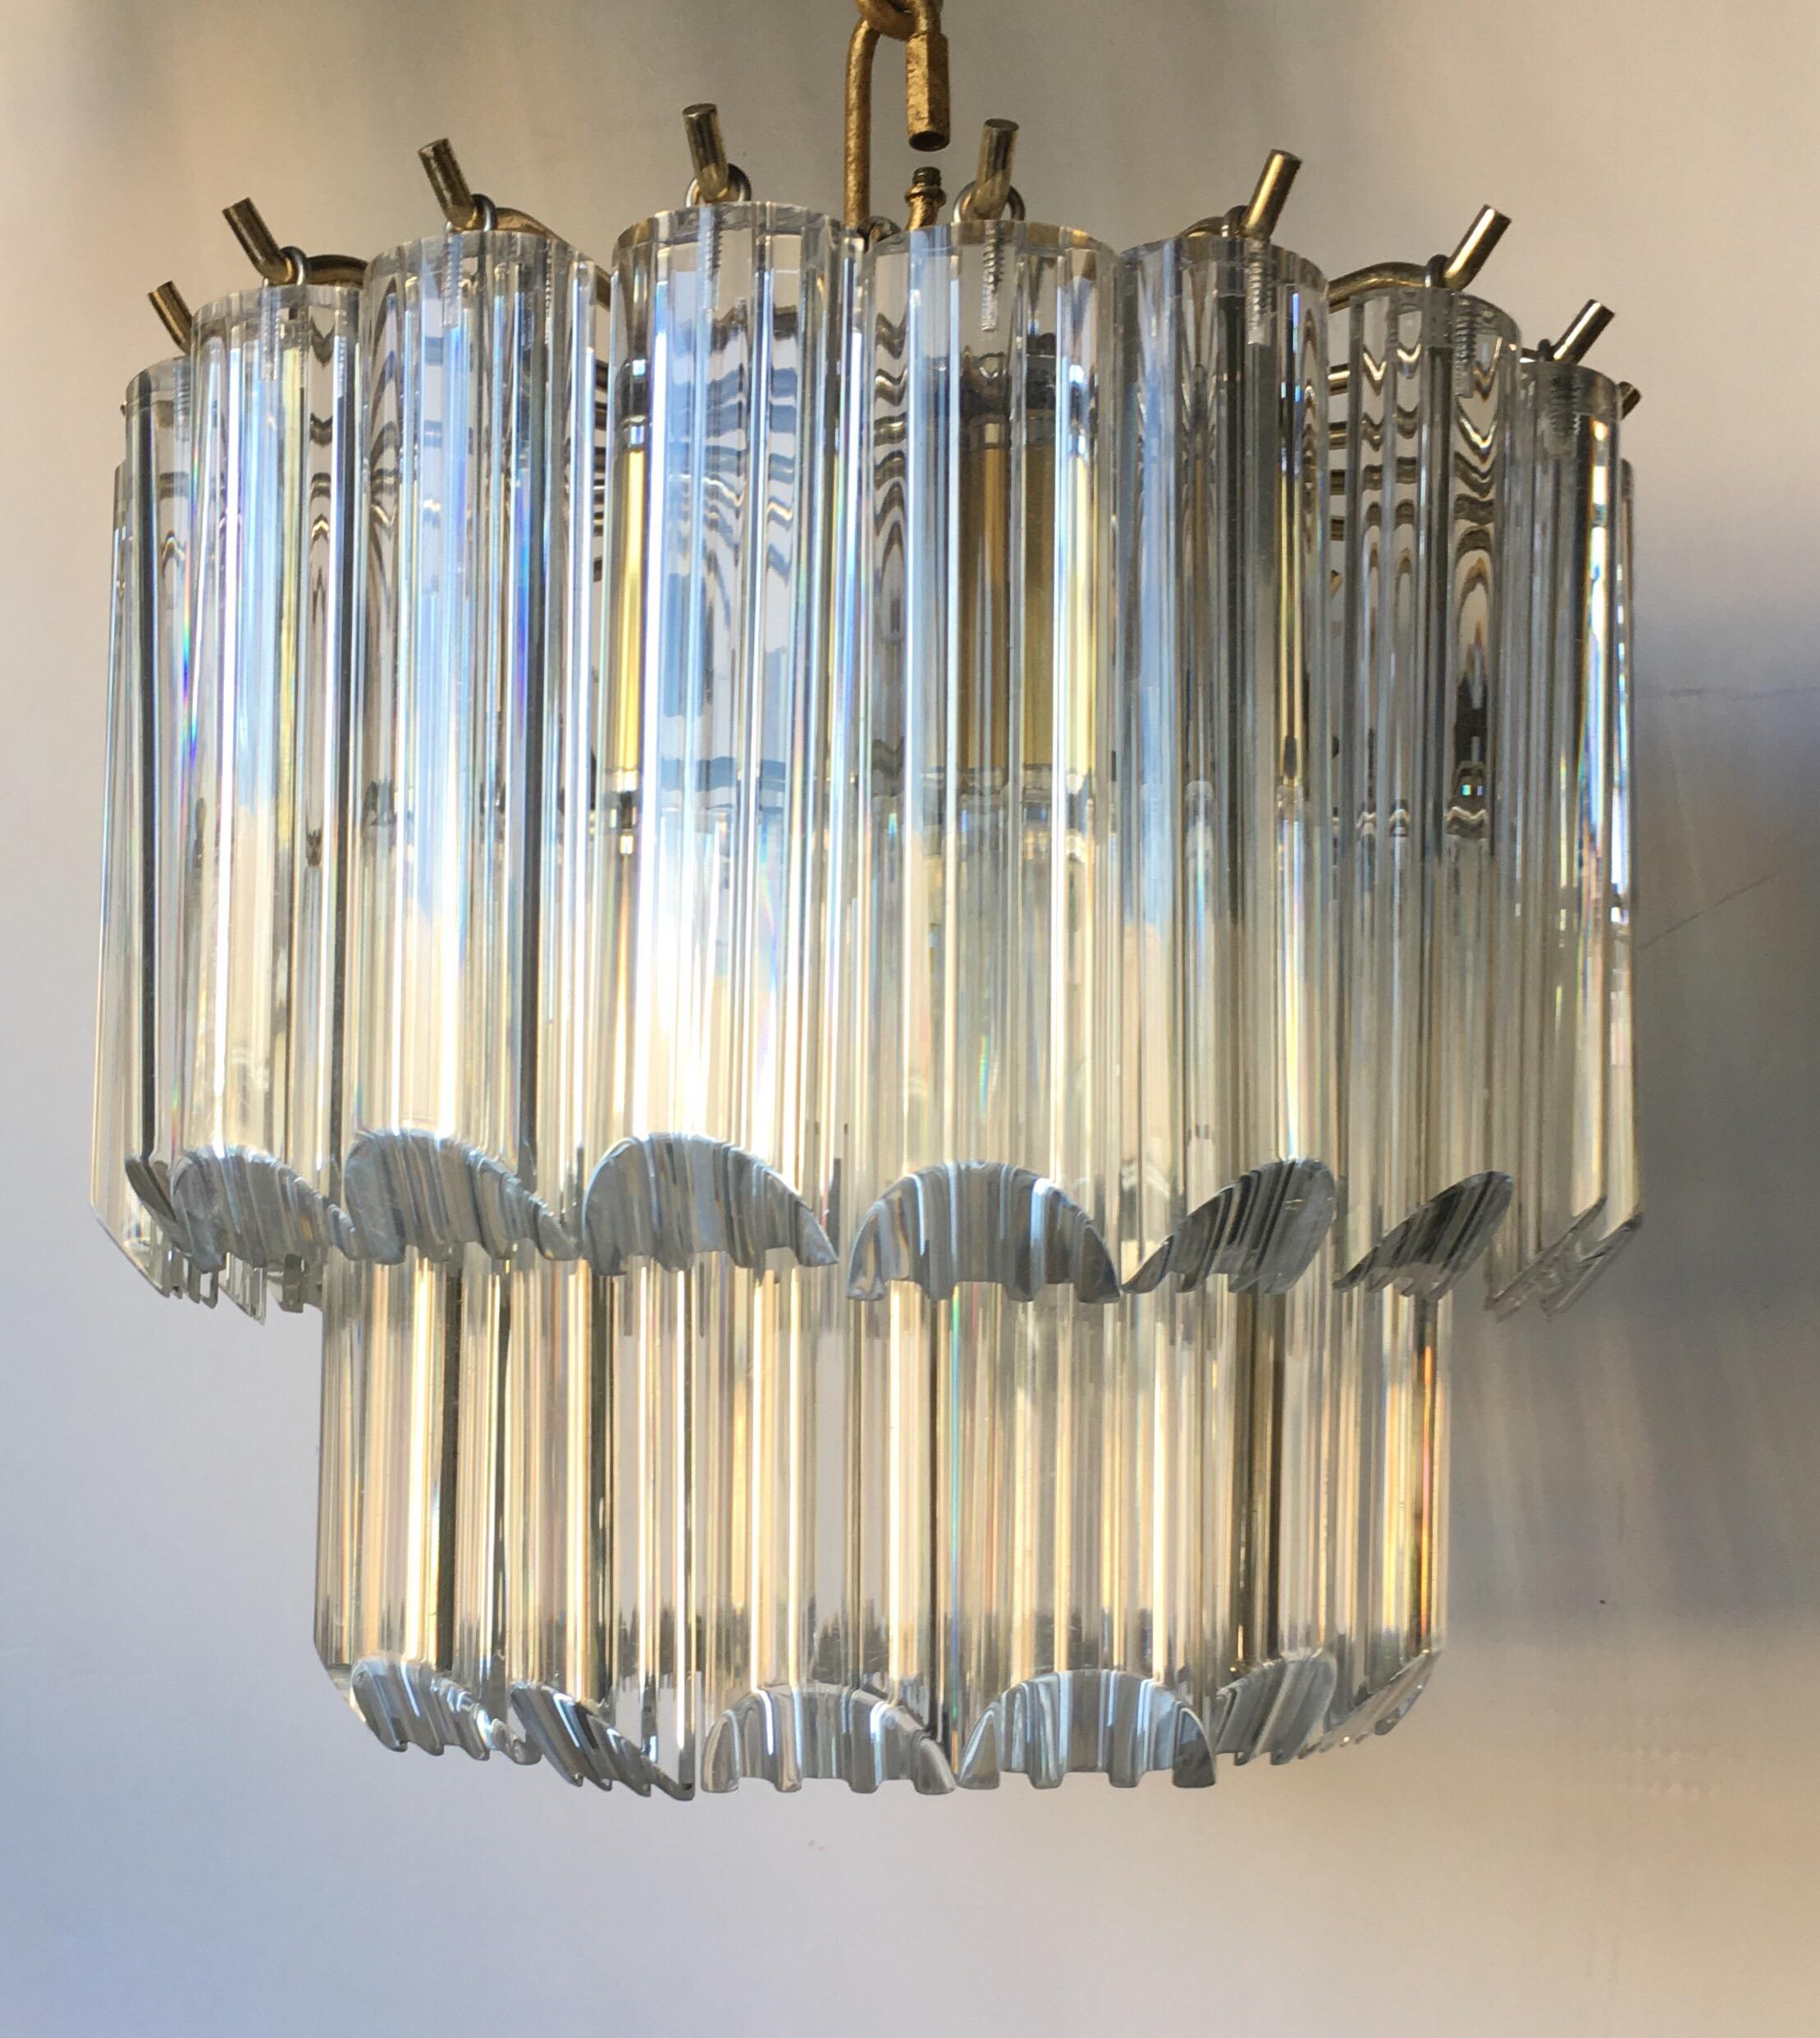 Petite Mid Century Modern 2-tier Lucite waterfall chandelier. Light fixture features a nice quality weighted polished chrome and brass frame with clear Lucite ribbed prisms. Perfect size for a small hallway or powder room.
Fixture takes four candle